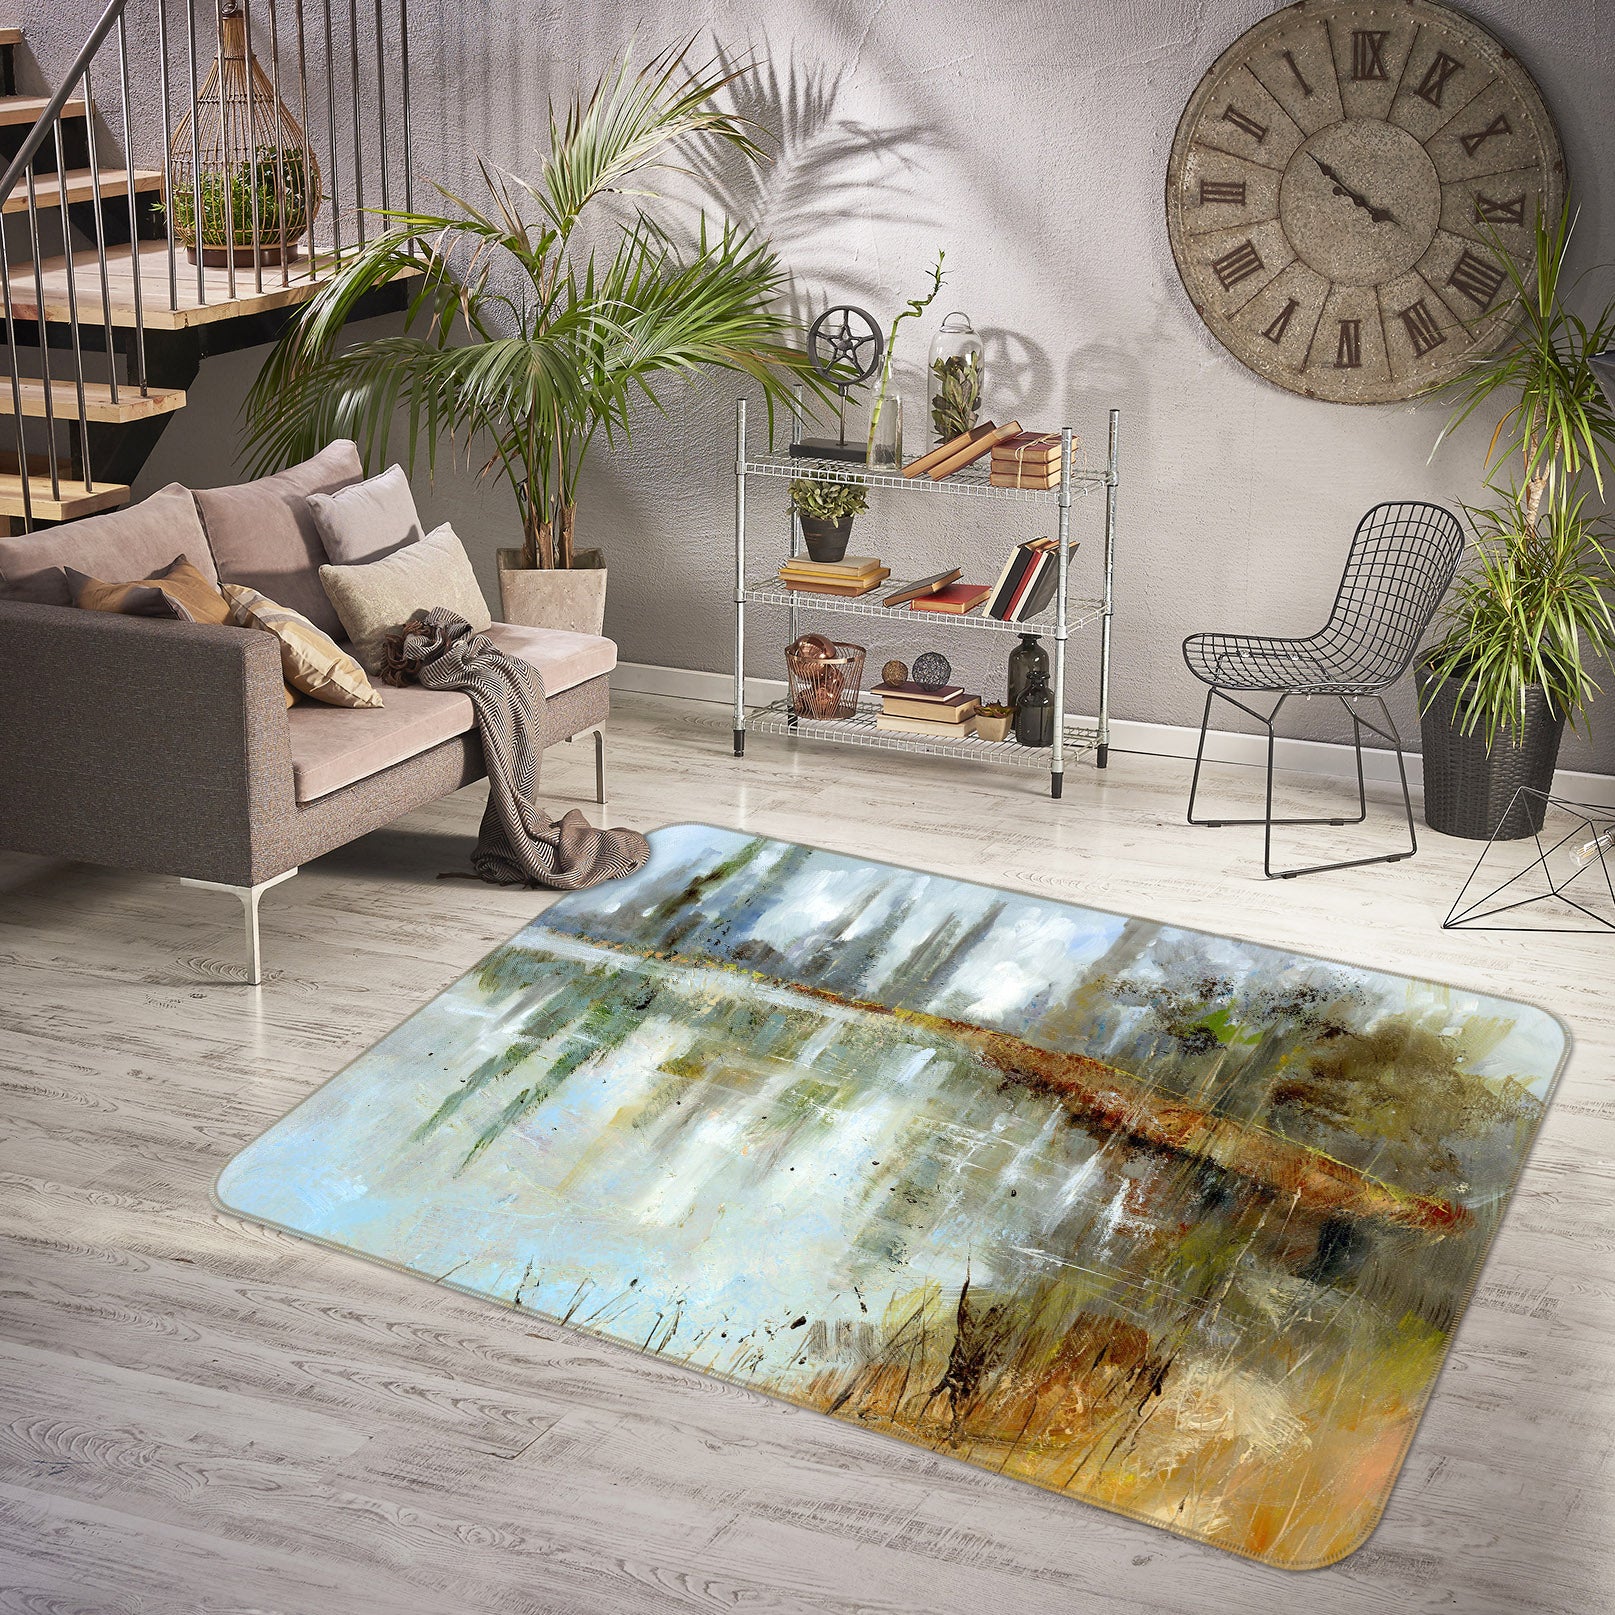 3D Ink Tree Reflection 84122 Anne Farrall Doyle Rug Non Slip Rug Mat